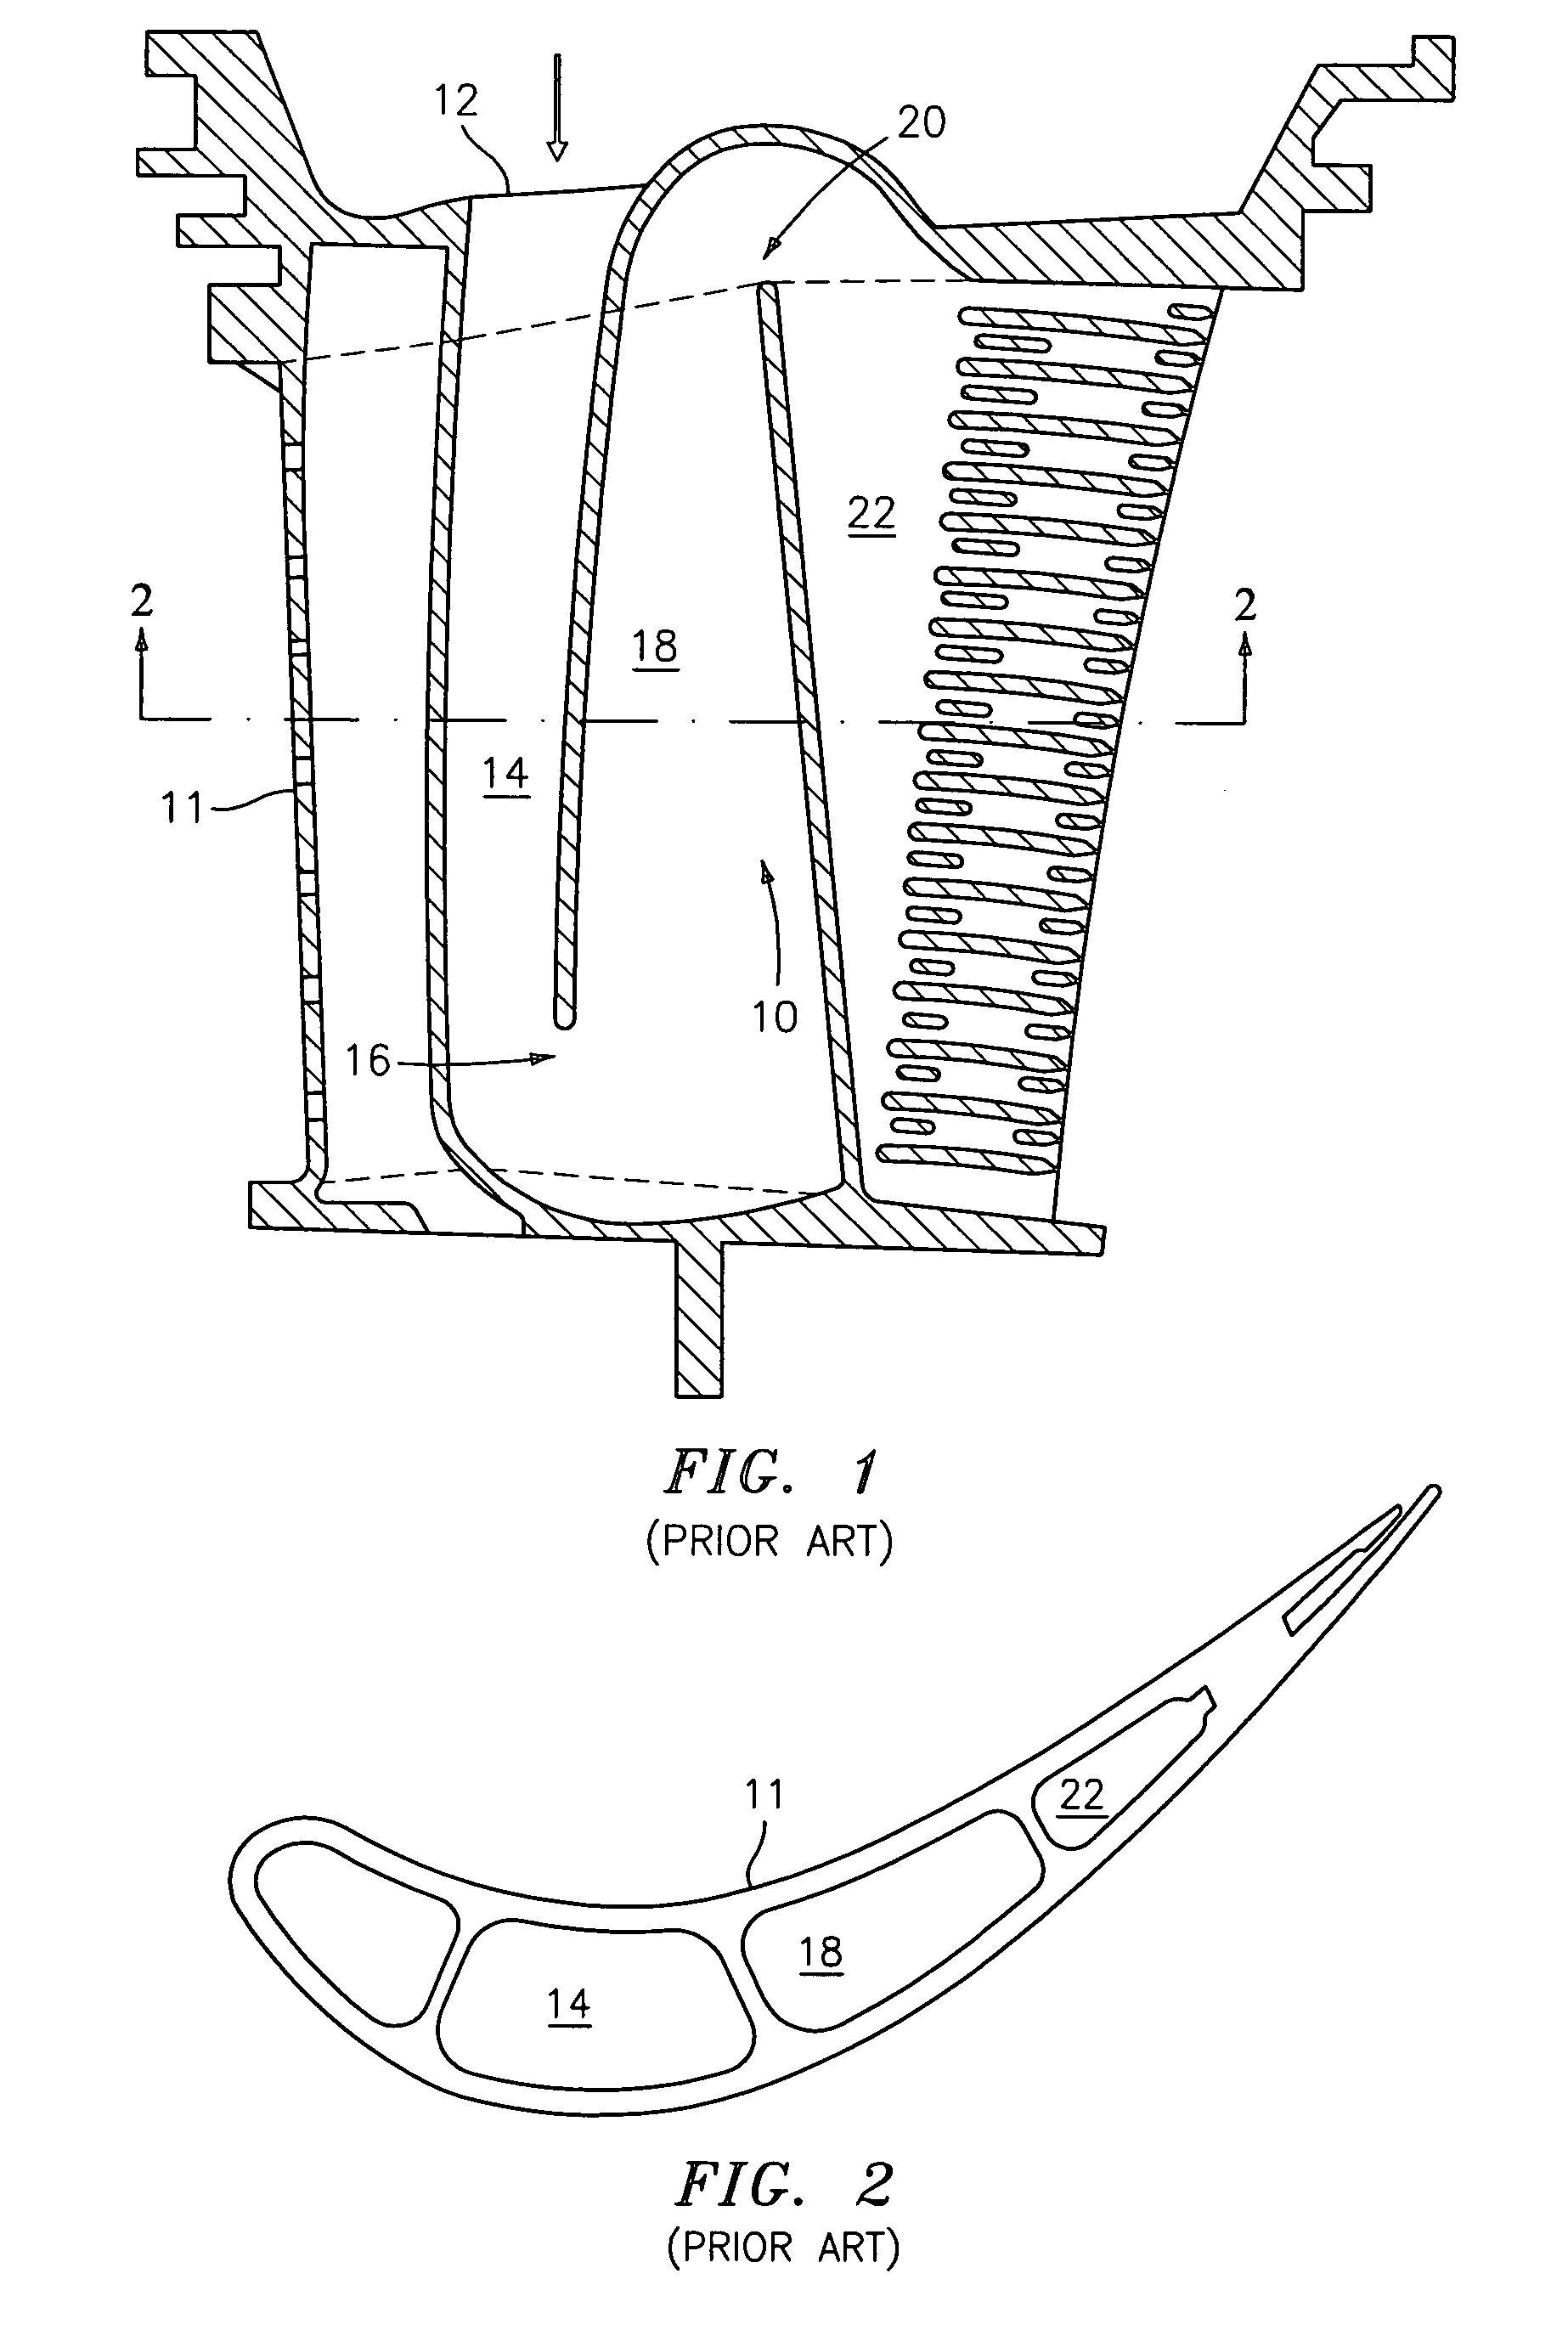 Enhanced serpentine cooling with U-shaped divider rib